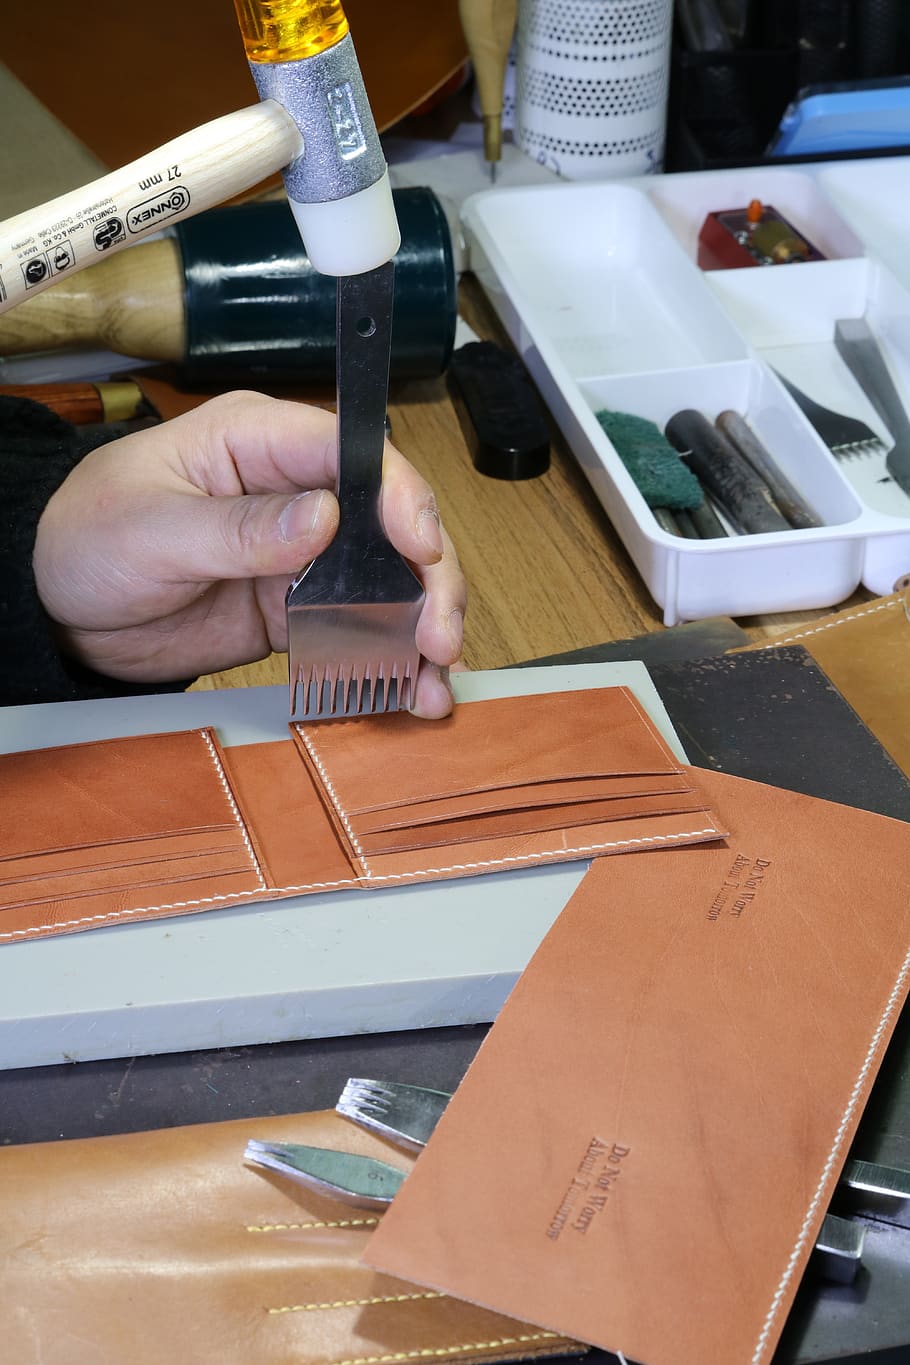 technique, leather, leather craft, bag, props, craft, tool, master, hobby, kobo